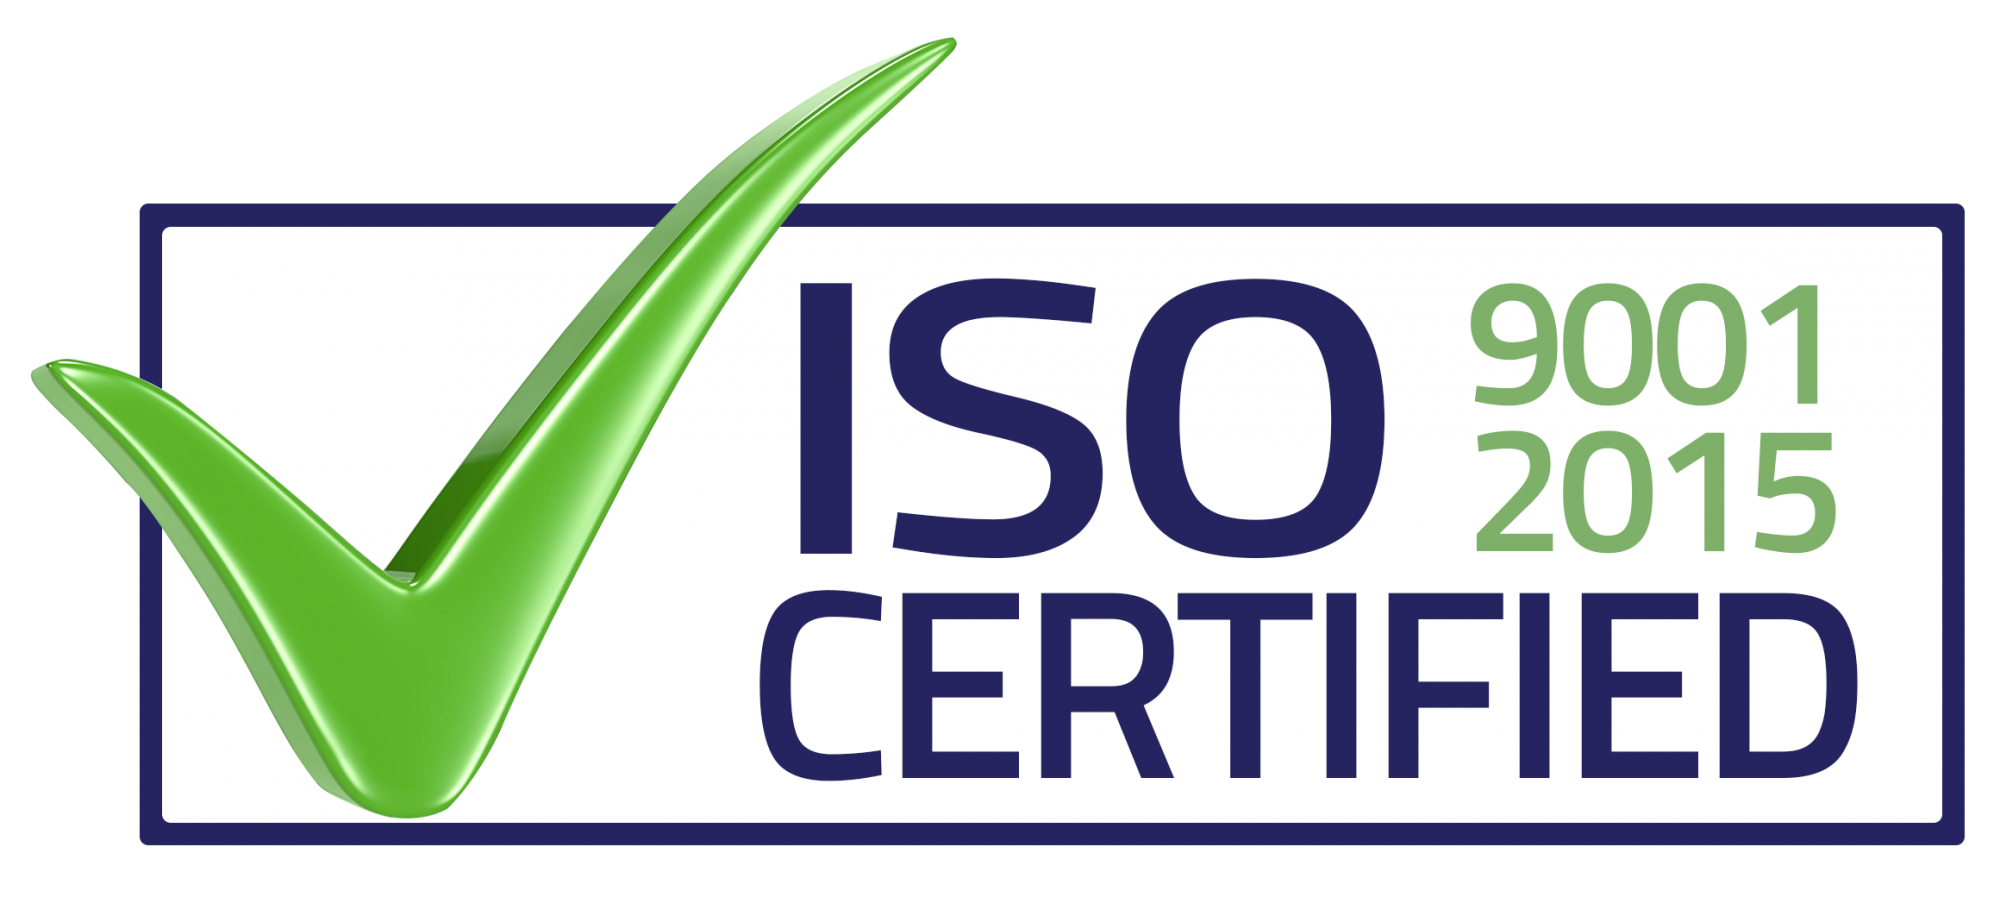 ISO 9001 2015 Certified PNG